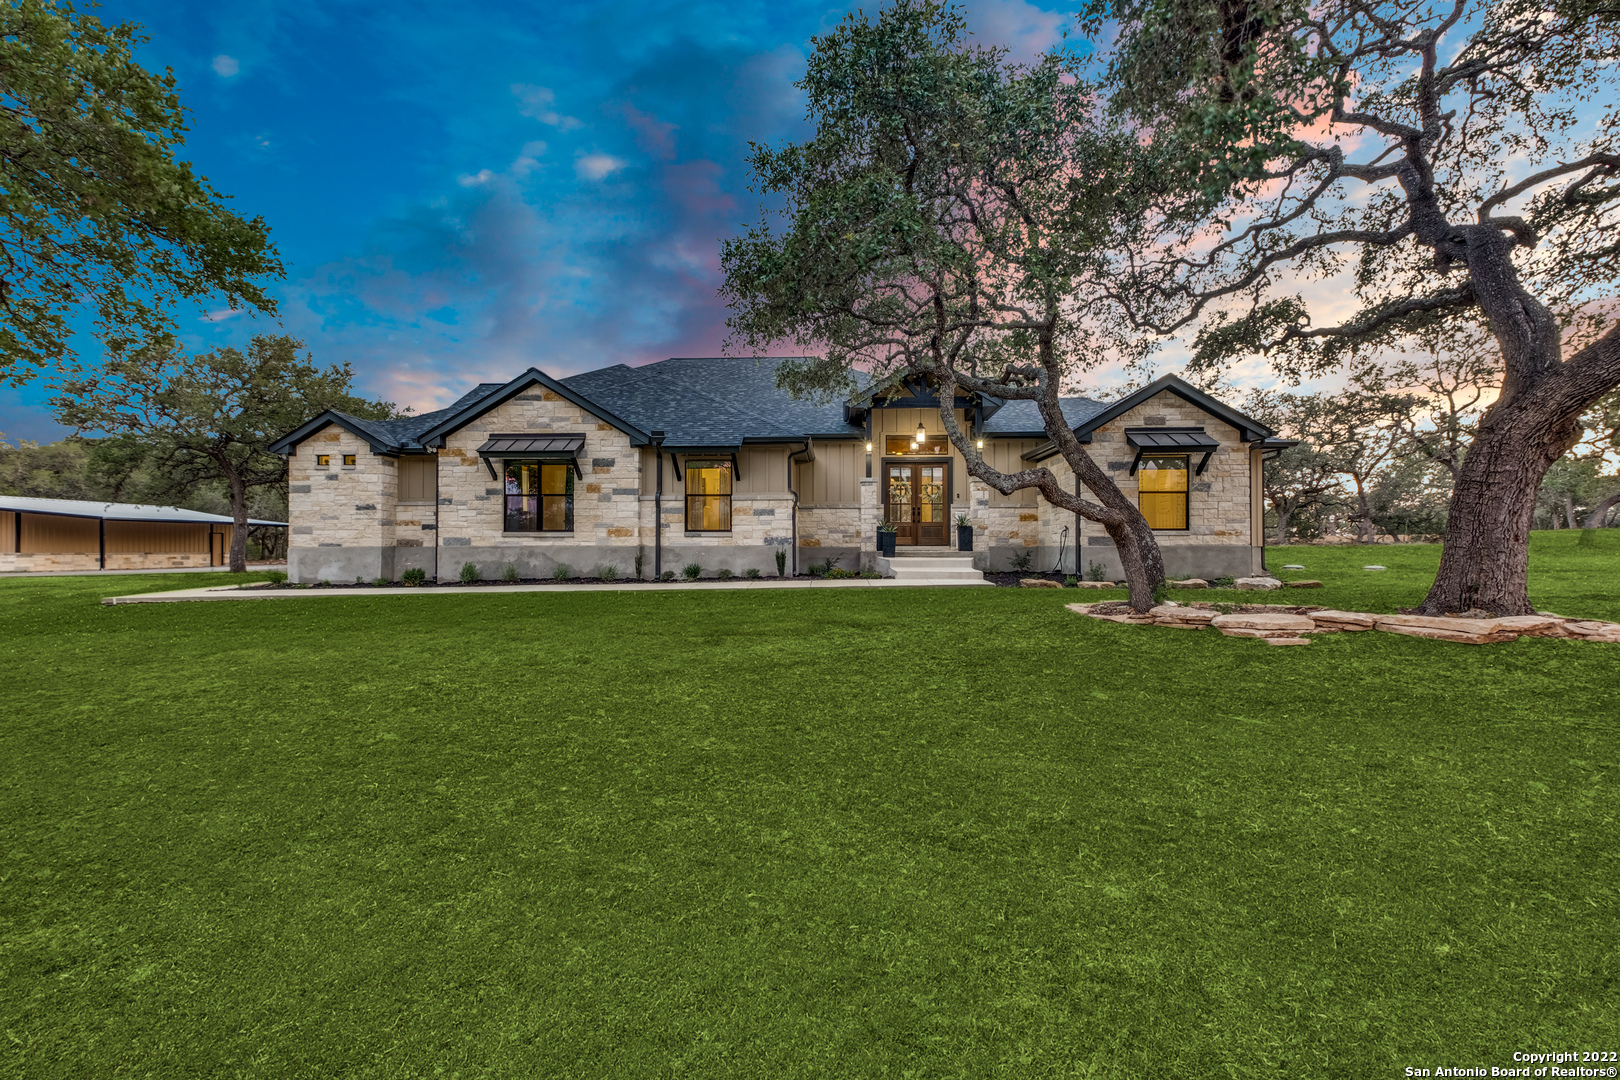 OPEN HOUSE SUNDAY JULY 3rd FROM 1-3! CALL HOLLY MAHLER FOR GATE CODE. Phone number will be at the gate. Stunning Modern Farmhouse style home with an OPEN FLOOR PLAN in Sabinas Creek Ranch, one of the newest and most desired GATED subdivisions of BOERNE. This ALMOST NEW home sits on over 8.5 WOODED ACRES on a cul-de-sac street and backs up to a large ranch. The home is situated in the middle of the lot so it cannot be seen from the road, plus it is surrounded by TONS OF OAK TREES for added privacy!  With all the windows in the home you will think you are living in a tree house! On cold winter nights, you will enjoy a fire in the floor to ceiling stone fireplace in the living room or a fire in the OUTDOOR FIREPLACE while keeping warm. In the evenings while relaxing on the large covered patio and watching the sun set, you will enjoy the distant VIEWS of the HILL COUNTRY.  As you enter the home, you will be overwhelmed by the openness and the high ceilings.   The home has 3 bedrooms, along with a STUDY, which could be used as a 4th bedroom.  The GOURMET KITCHEN has a brick backsplash, an oversized quartz island with lots of room for seating plus built in custom cabinets for abundant storage, along with a GAS Cooktop, with  spice racks on both sides and a HUGE WALK-IN PANTRY. Every designer detail was thought out for your new dream home from the cabinetry to the lighting!! This home was designed with entertaining in mind, including a wet bar and a half bath with access to the outside patio. After a hard day of work, relax in the Owner's retreat with the large bedroom and bathroom with separate shower and soaking tub. The OVERSIZED Owner's CLOSET has built in dressers for added storage. Plus, it is connected to the laundry room for convenience.   This lot currently has a WILDLIFE EXEMPTION, which if maintained, will save money on taxes! Plus, you are welcome to bring your HORSES, COWS OR CHICKENS. This home is wired with a manual transfer switch for your portable generator in case you ever need it! There is a 30ft.x 40ft metal WORKSHOP WITH A CARPORT for additional parking and all your toys!  If you like to walk, you can walk down to the community park and enjoy the Sabinas Creek. This home is conveniently located to all that Boerne has to offer including dining, wineries, and small town shopping! Once you drive through the gates of Sabinas Creek Ranch you will not want to leave!